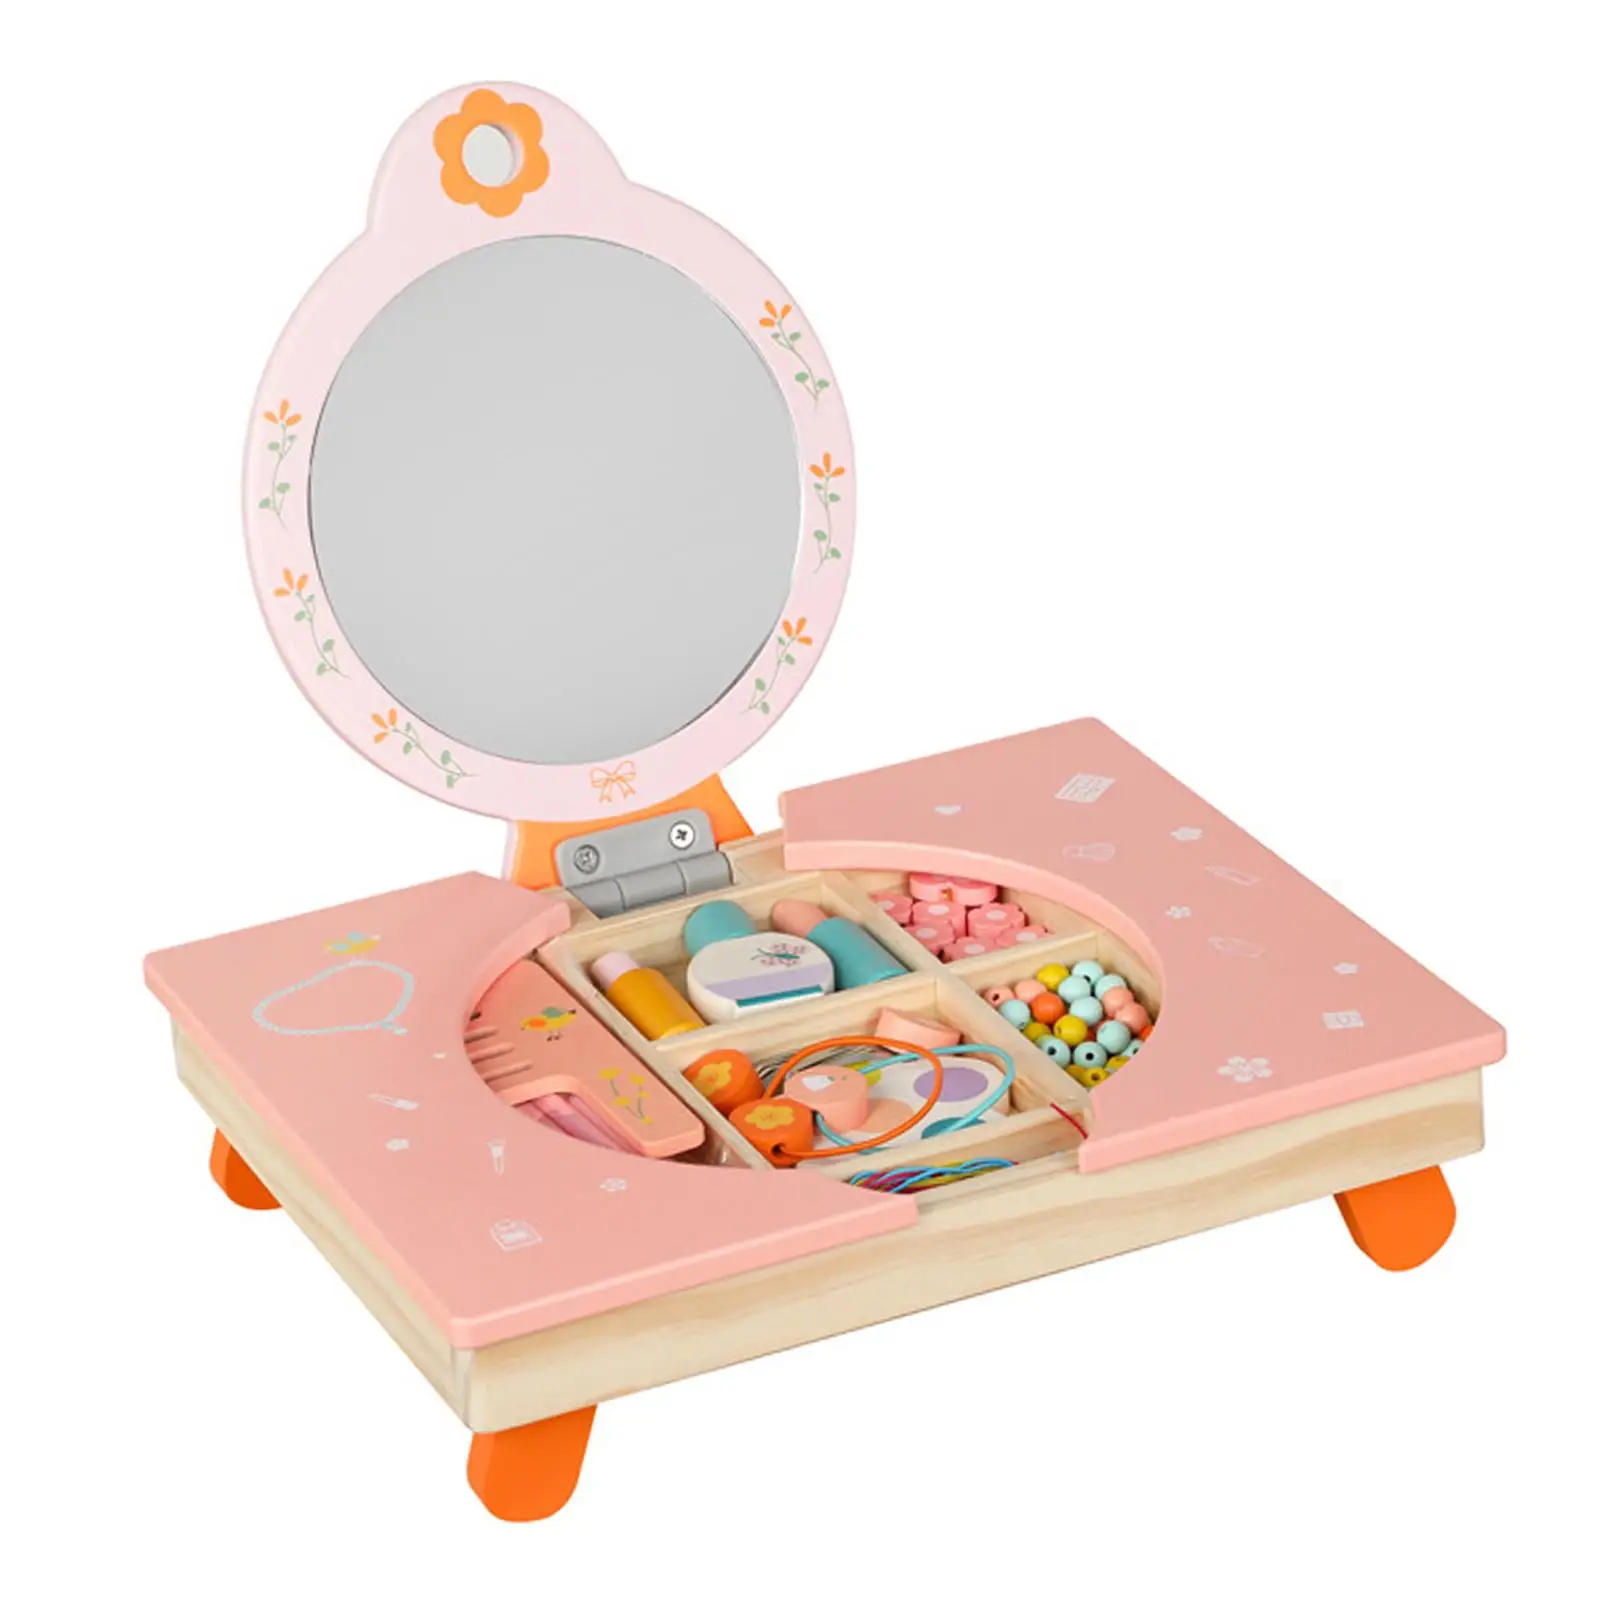 Kids Play Vanity Toy Playset Educational Activities Toys Early Enlightenment